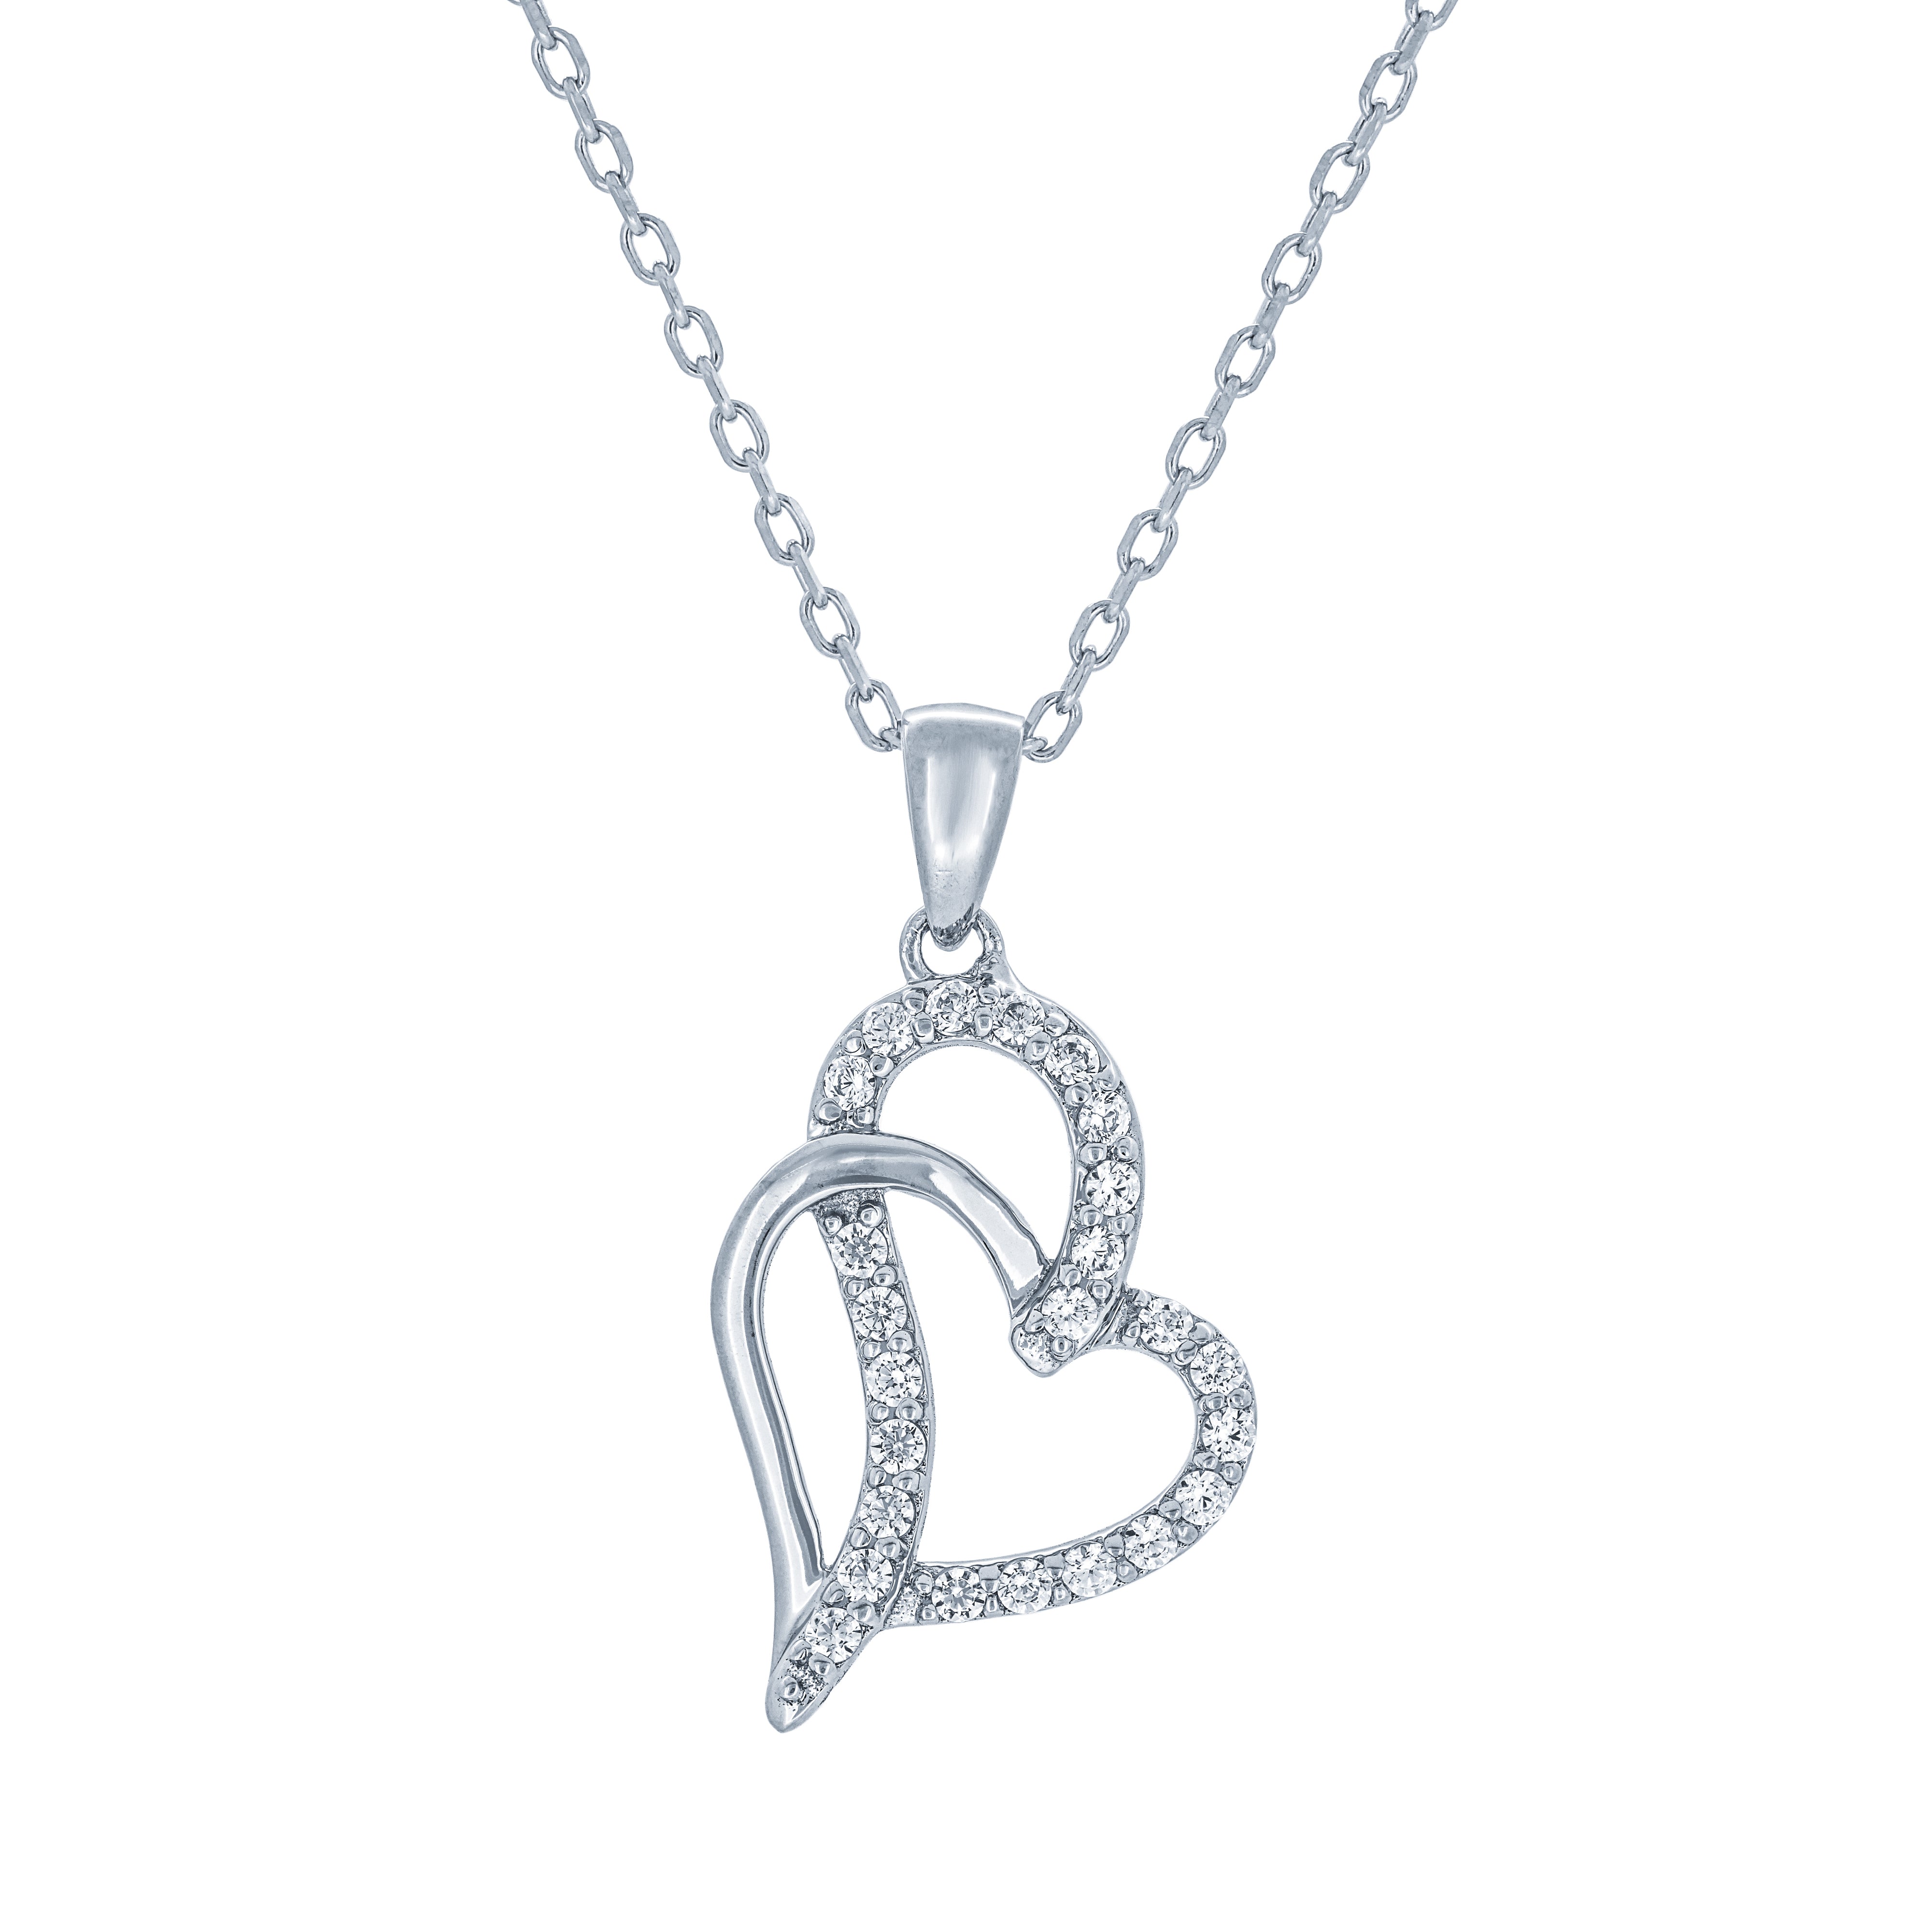 (100005) White Cubic Zirconia Heart Pendant Necklace In Sterling Silver